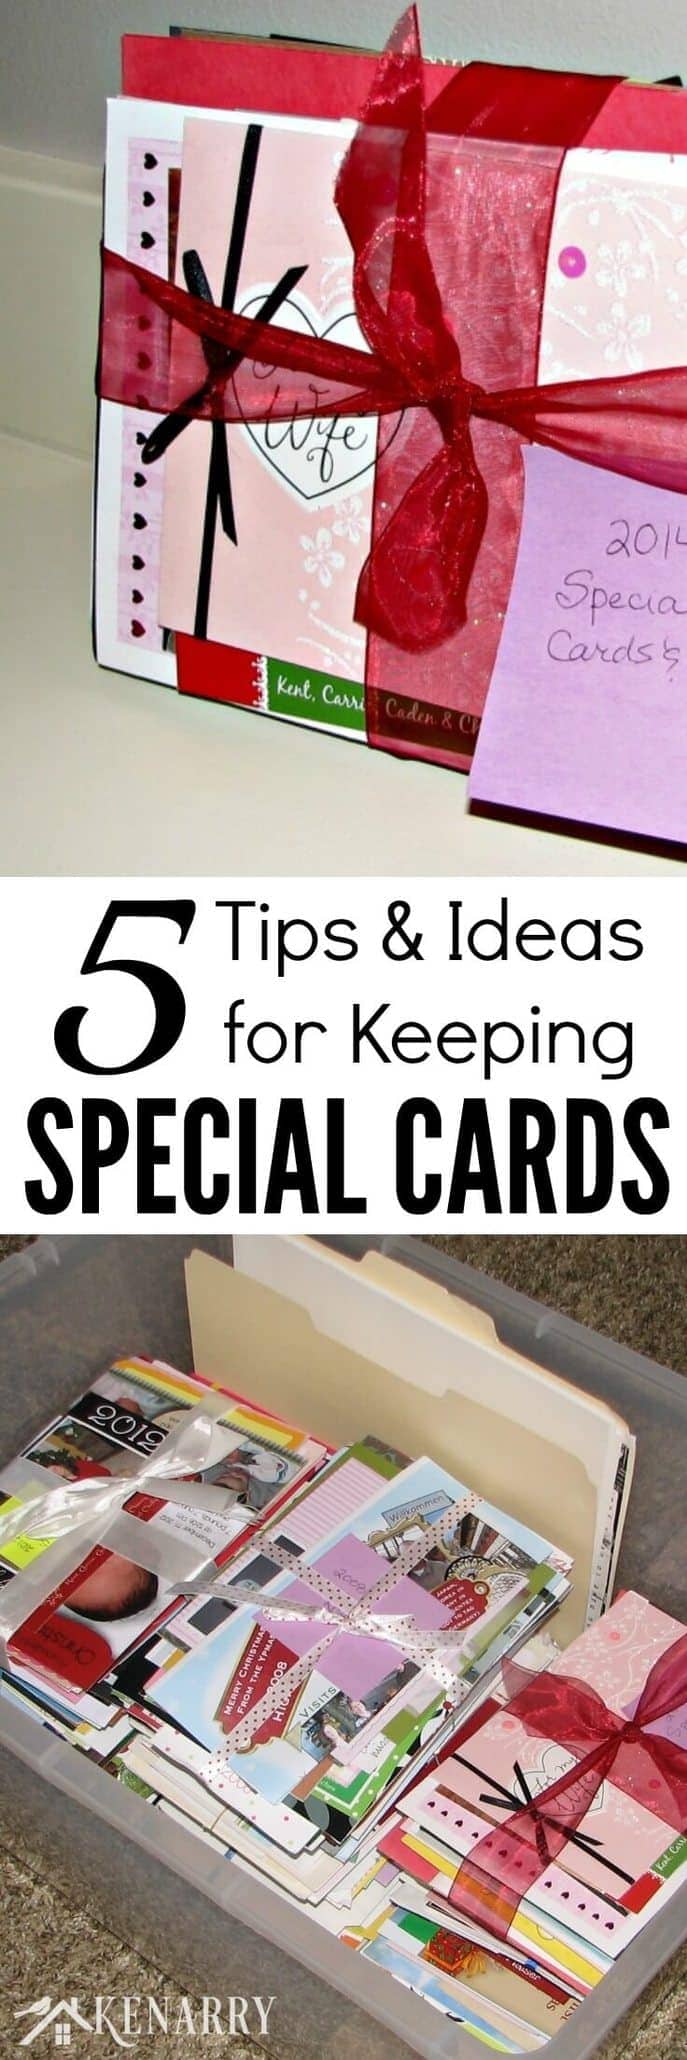 These are great tips and ideas for keeping special cards and notes you get during the year for birthdays, anniversaries, holidays, and thank you cards.